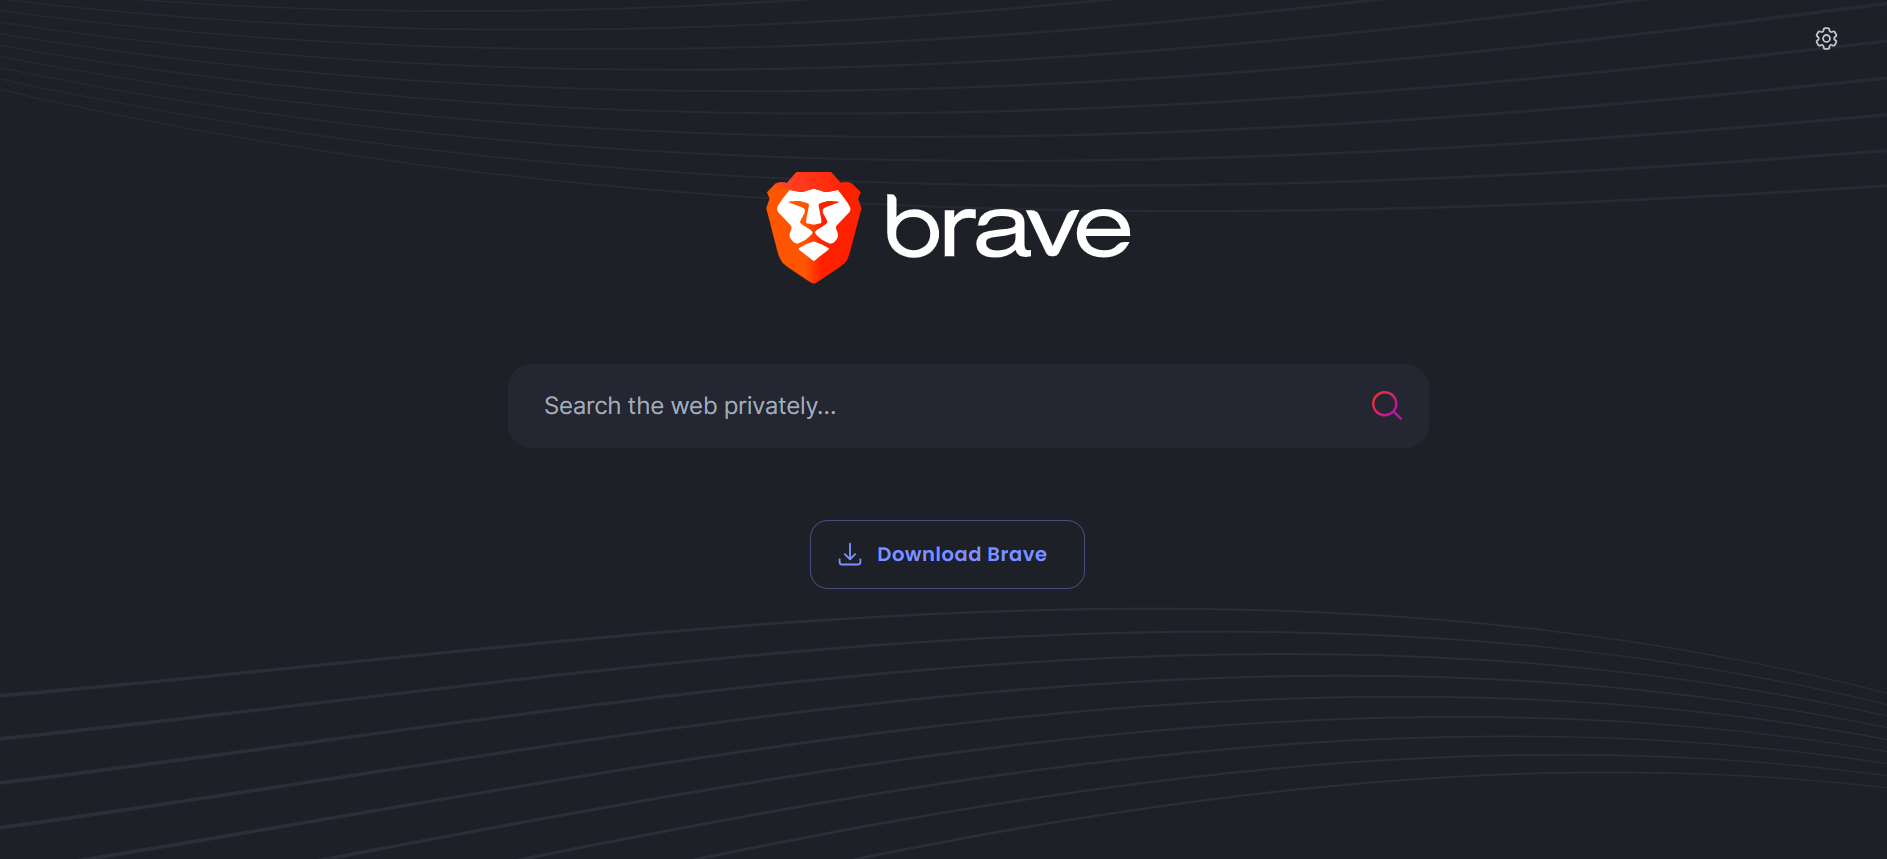 The Brave Search Engine Homepage